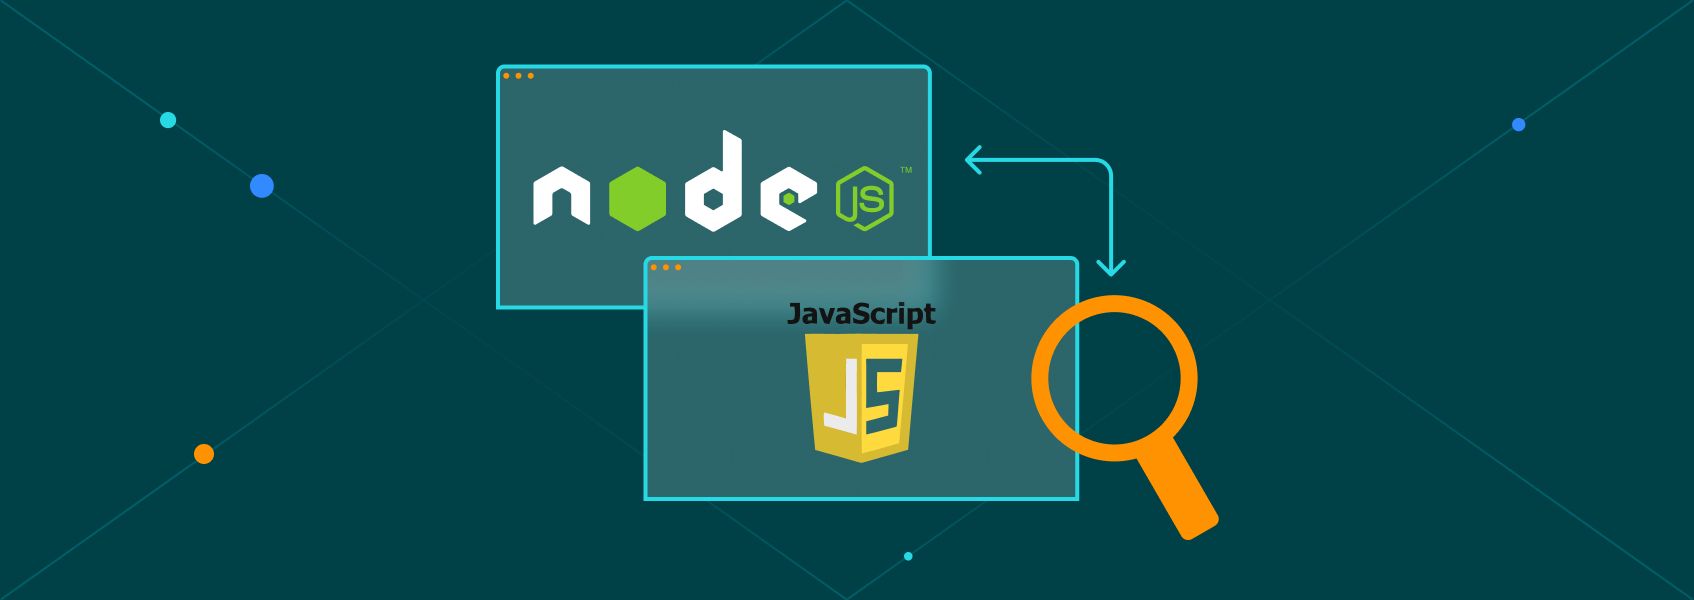 Web Scraping With JavaScript and Node.js Without Getting Blocked